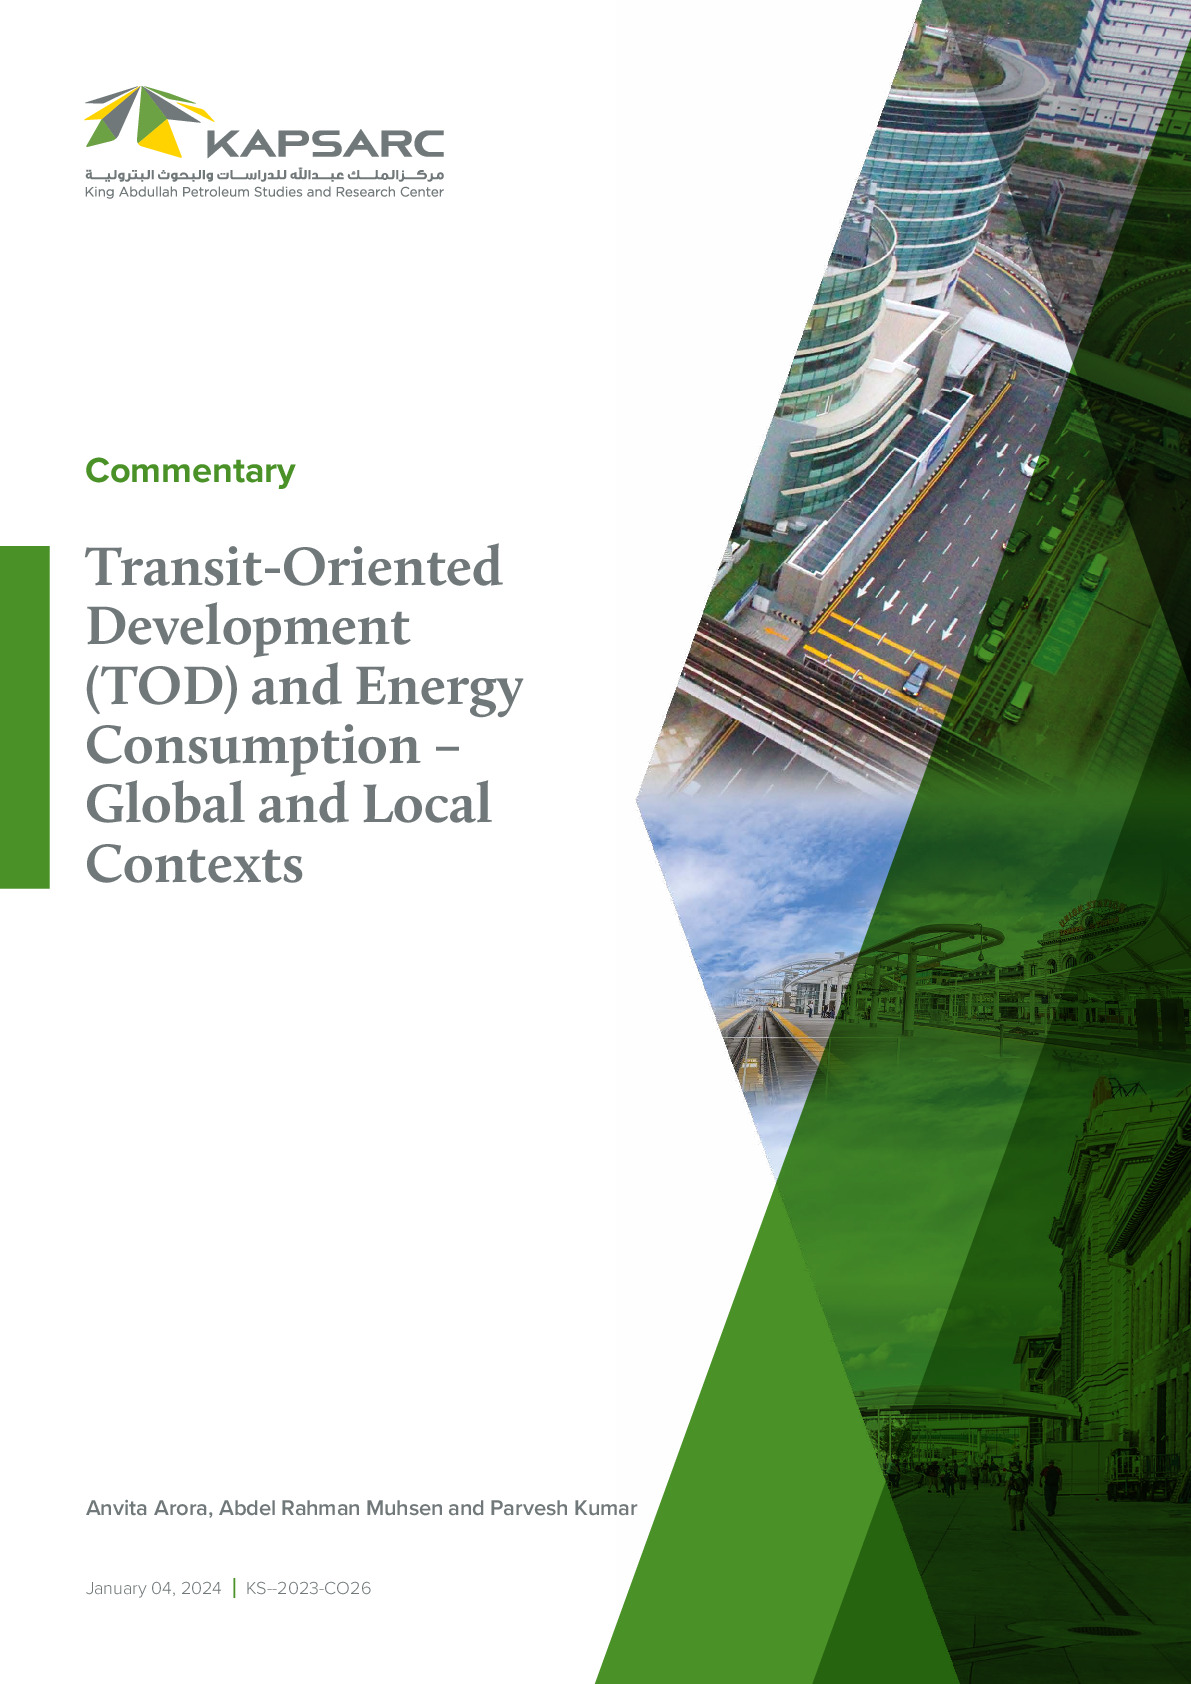 Transit-Oriented Development (TOD) and Energy Consumption – Global and Local Contexts